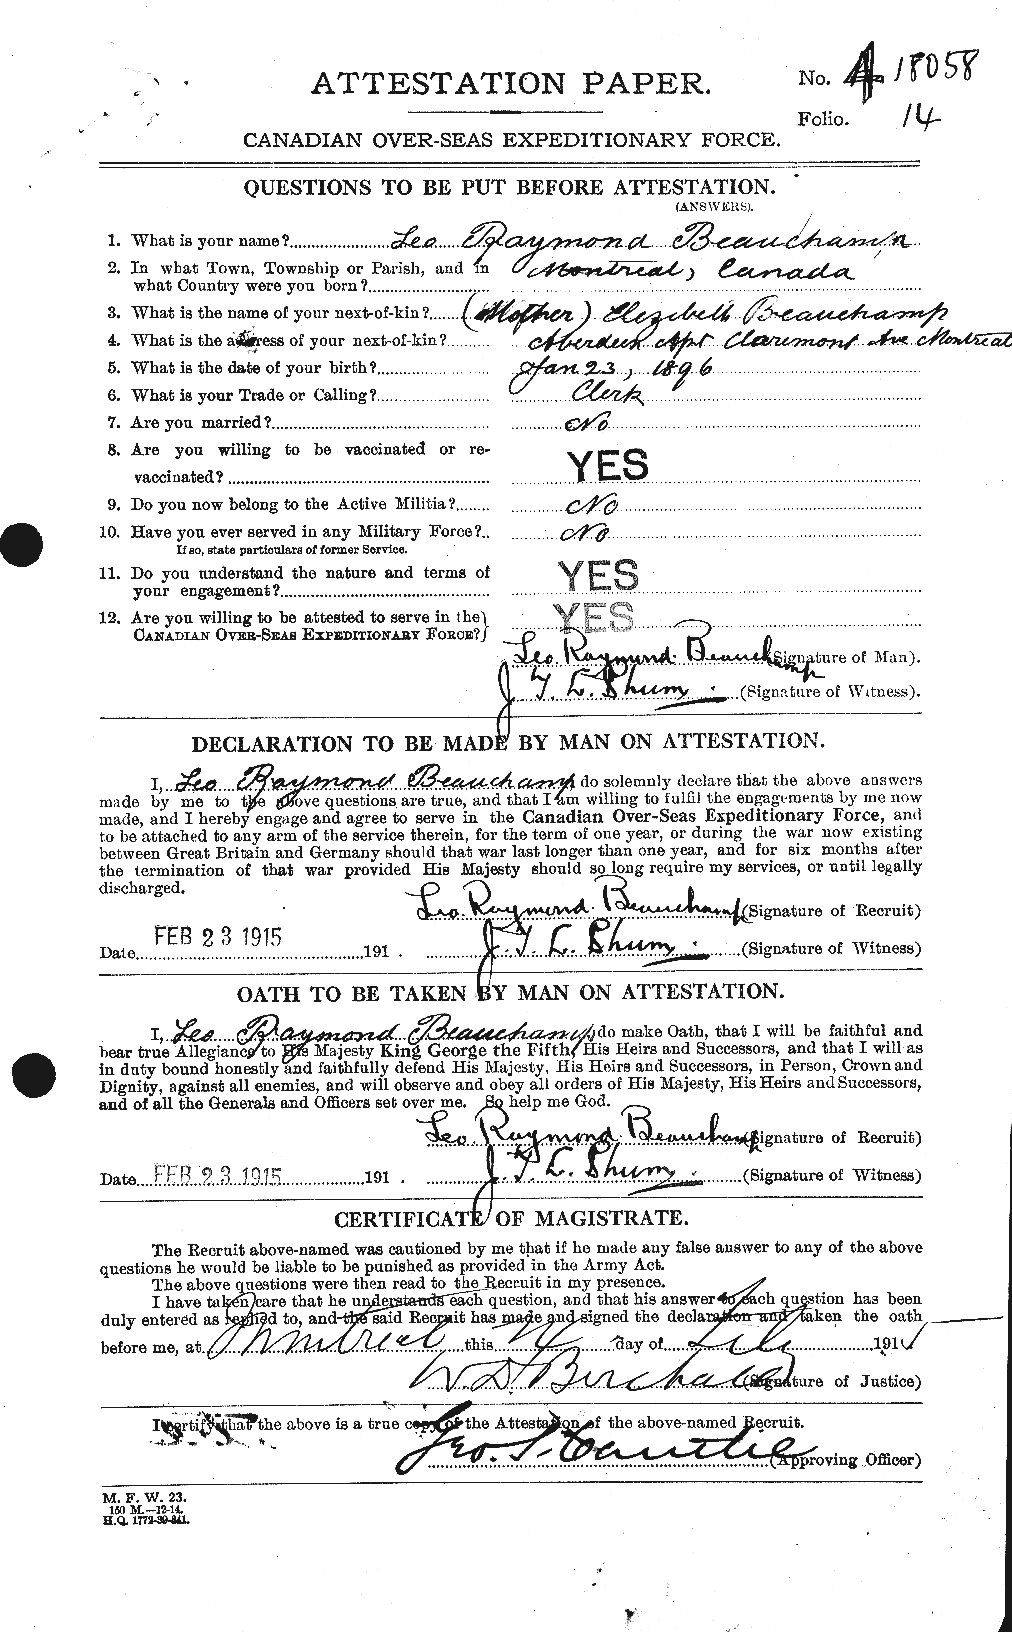 Personnel Records of the First World War - CEF 231001a